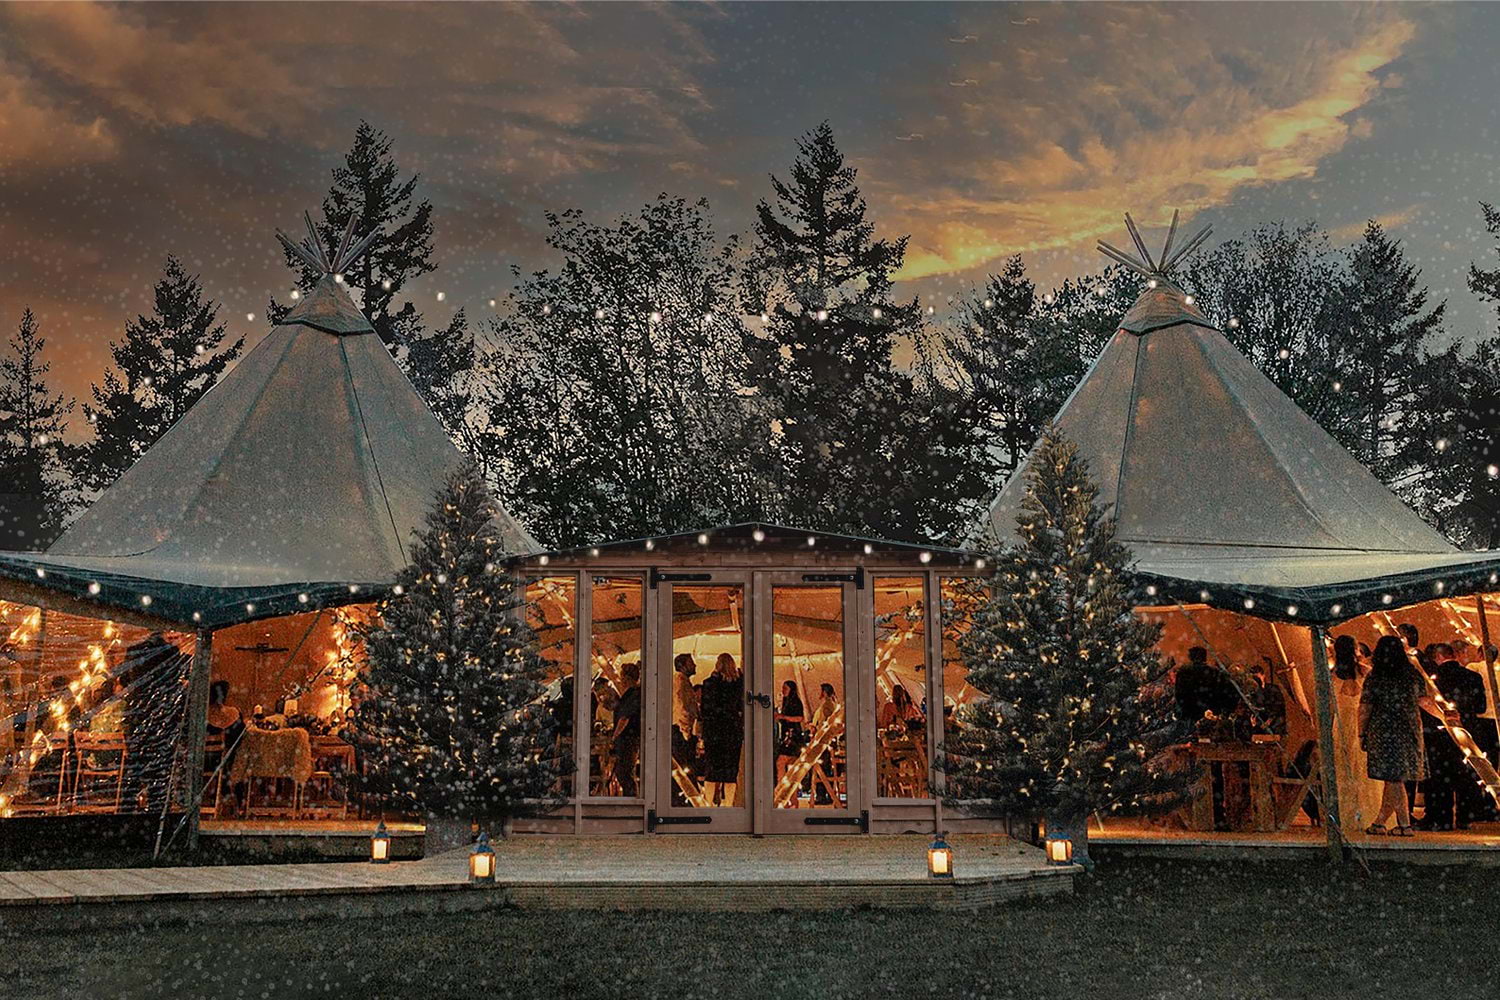 There's an alpine tipi pop-up bar coming to Parsons Green next month